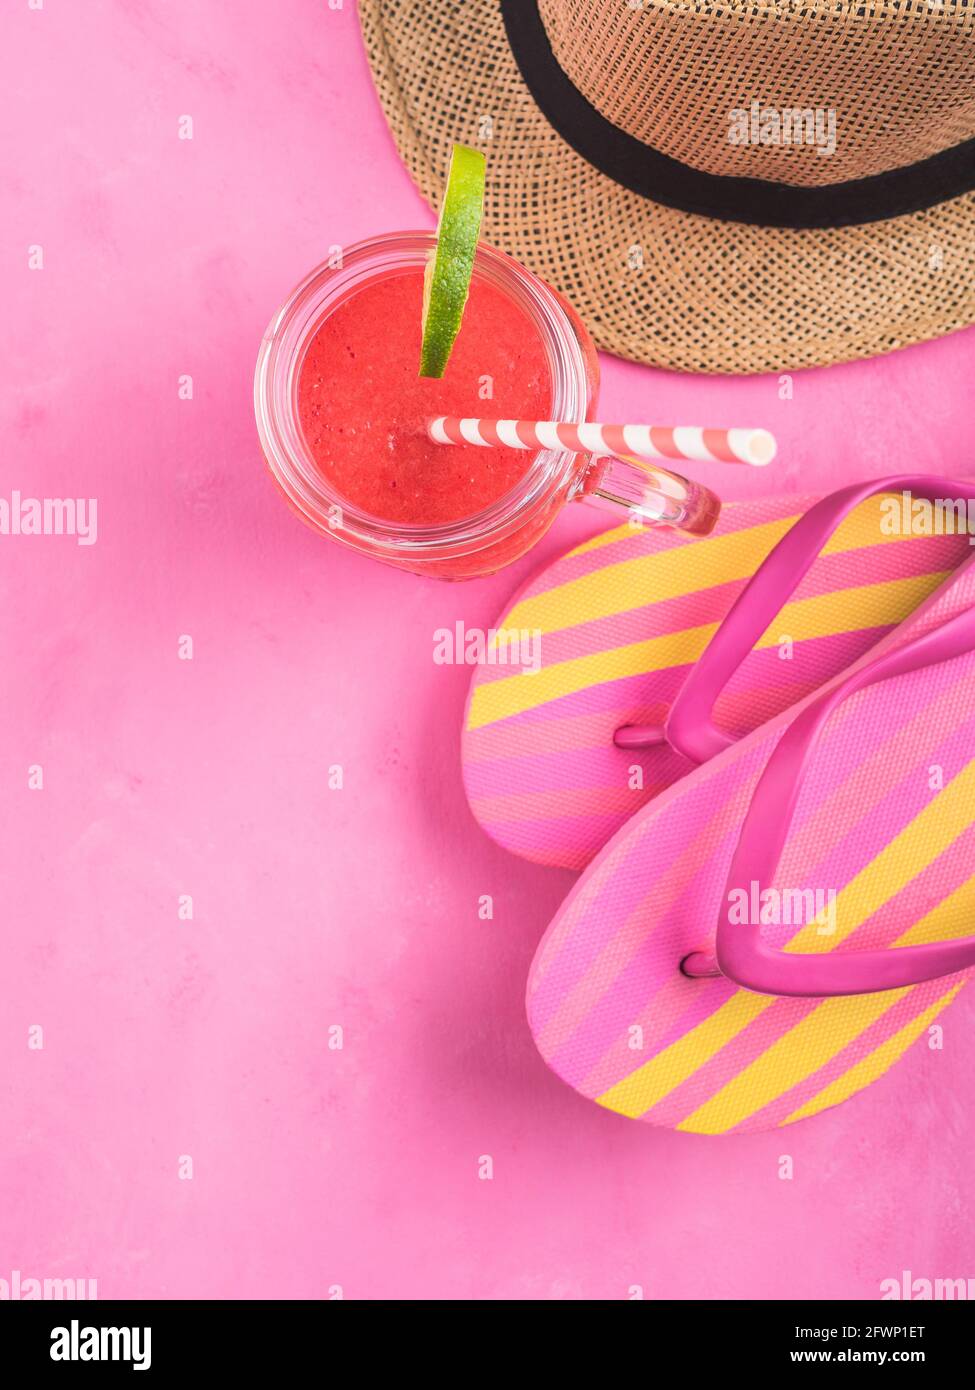 Straw hat, fli flops and red smoothie on pink Stock Photo